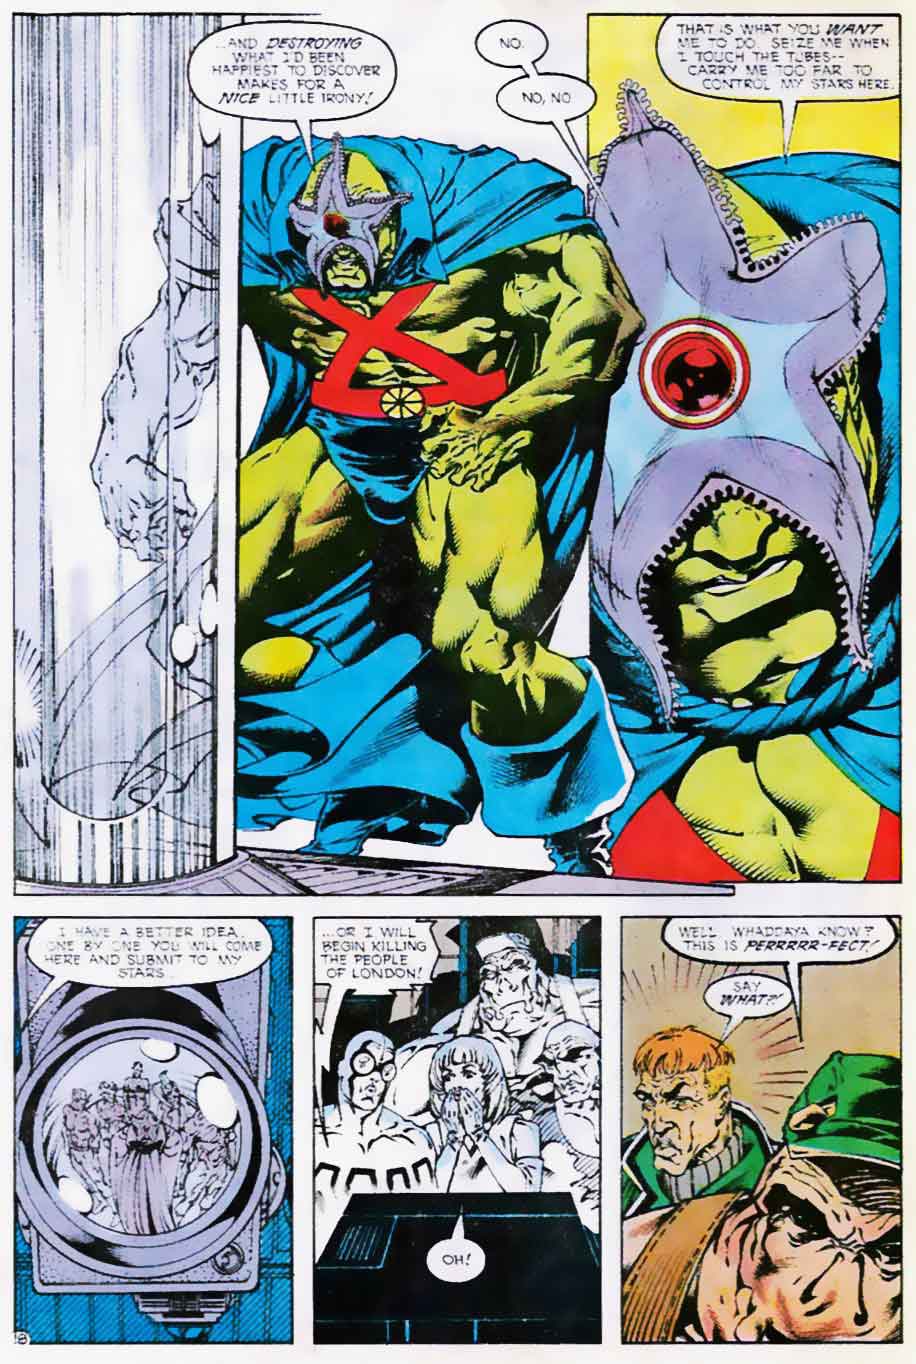 Justice League Europe #28 by Keith Giffen, Scripter, Bart Sears and Randy Elliott